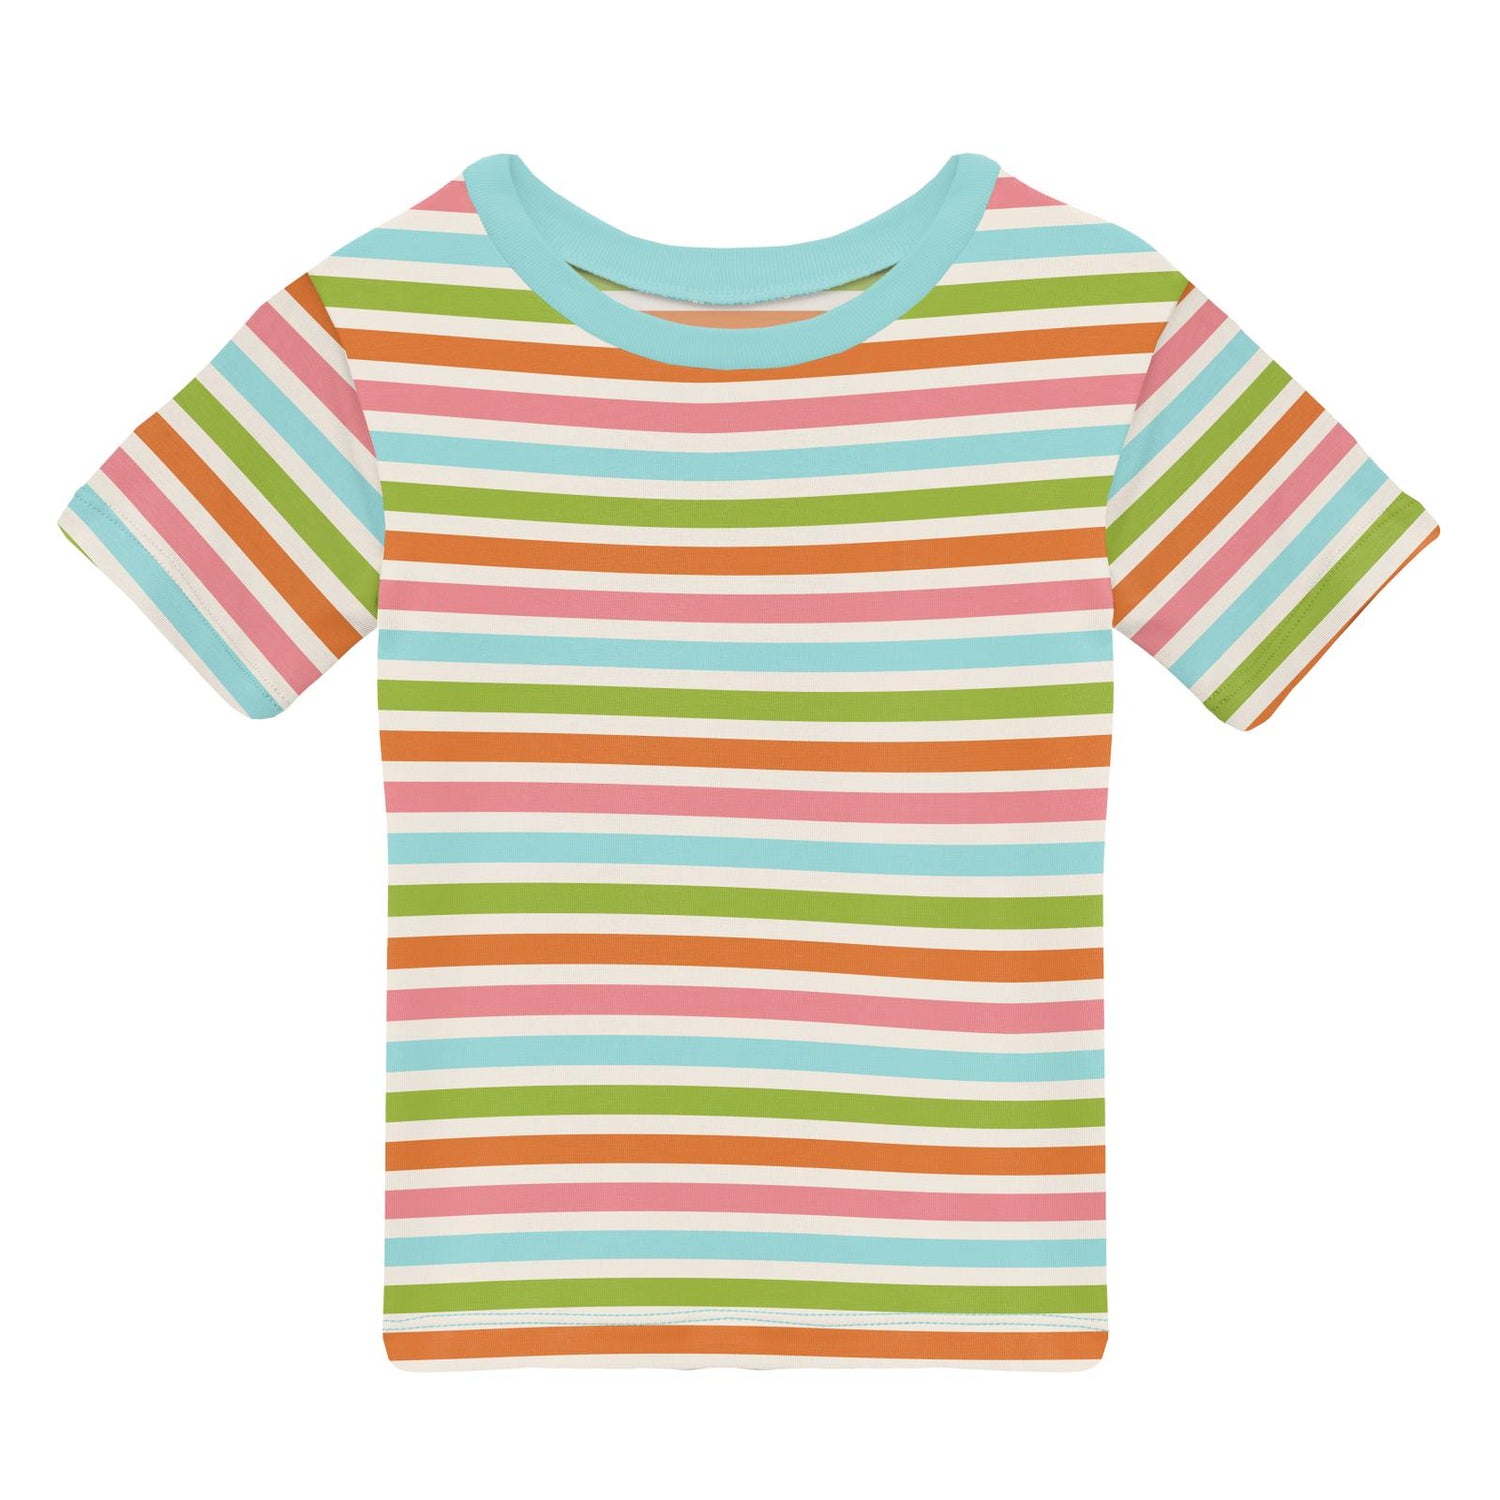 Print Short Sleeve Easy Fit Crew Neck Tee in Beach Day Stripe